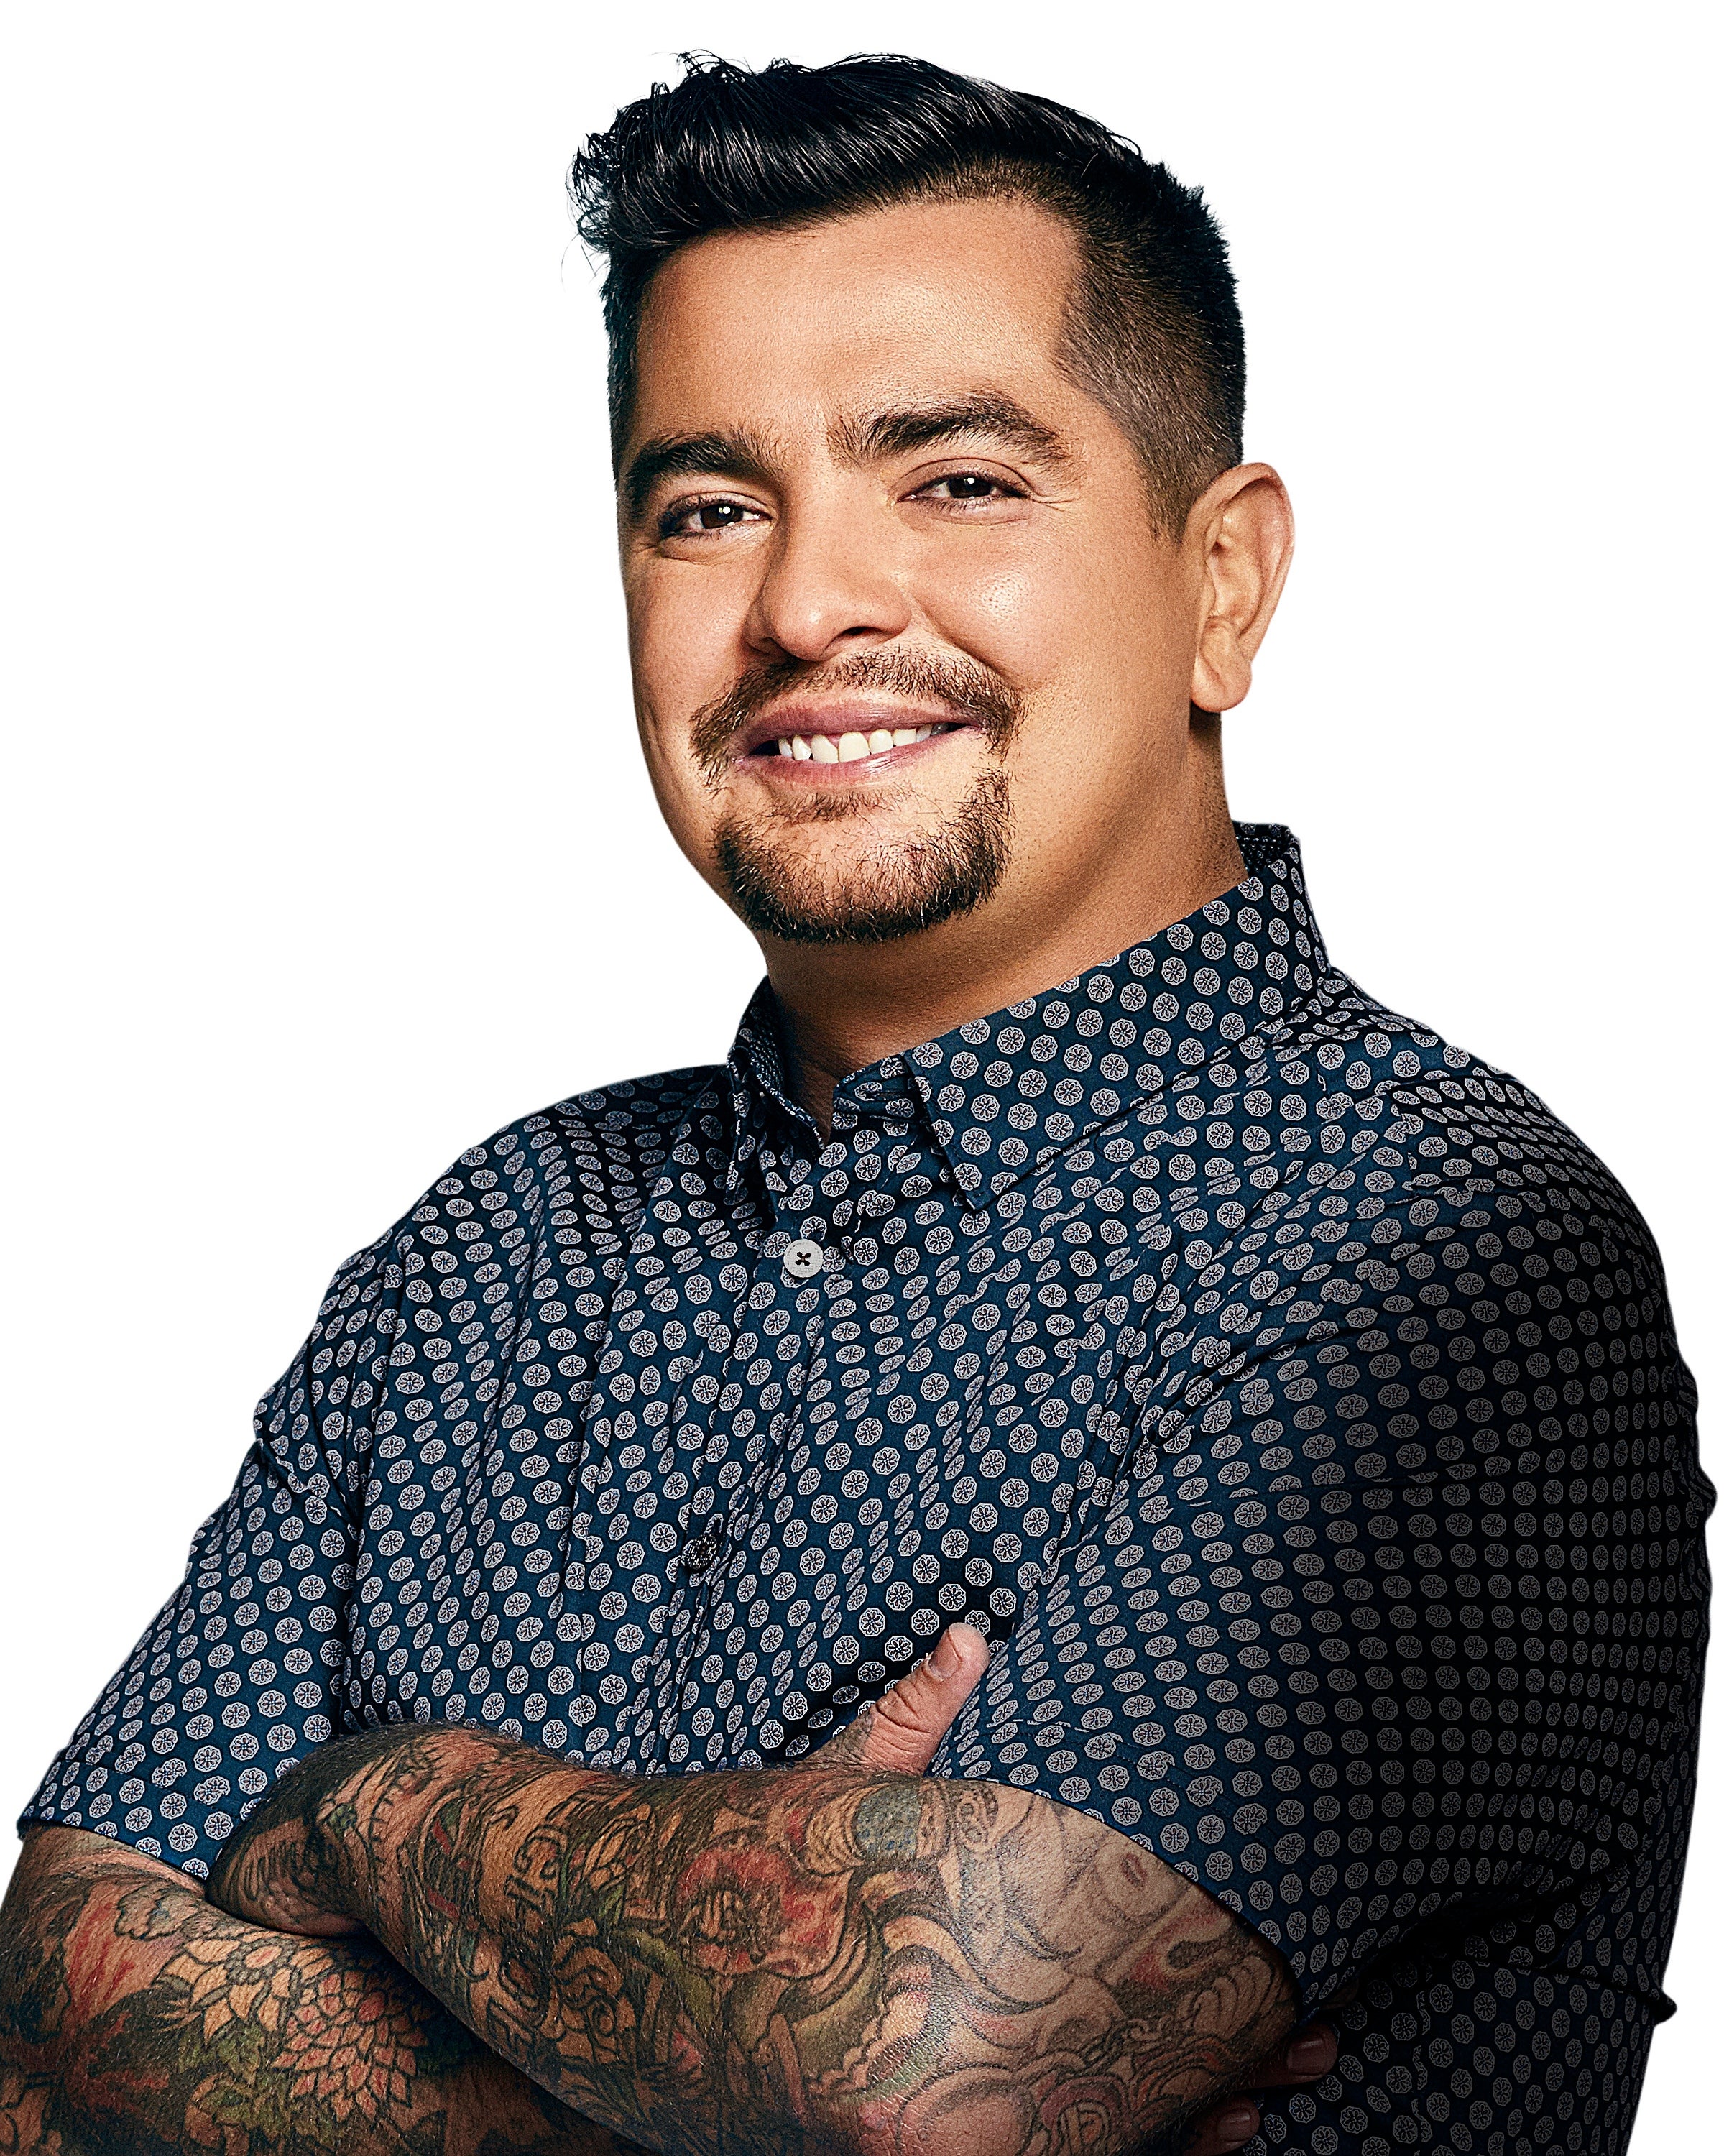 How Celebrity Chef Aaron Sanchez Has Influenced the Culinary World